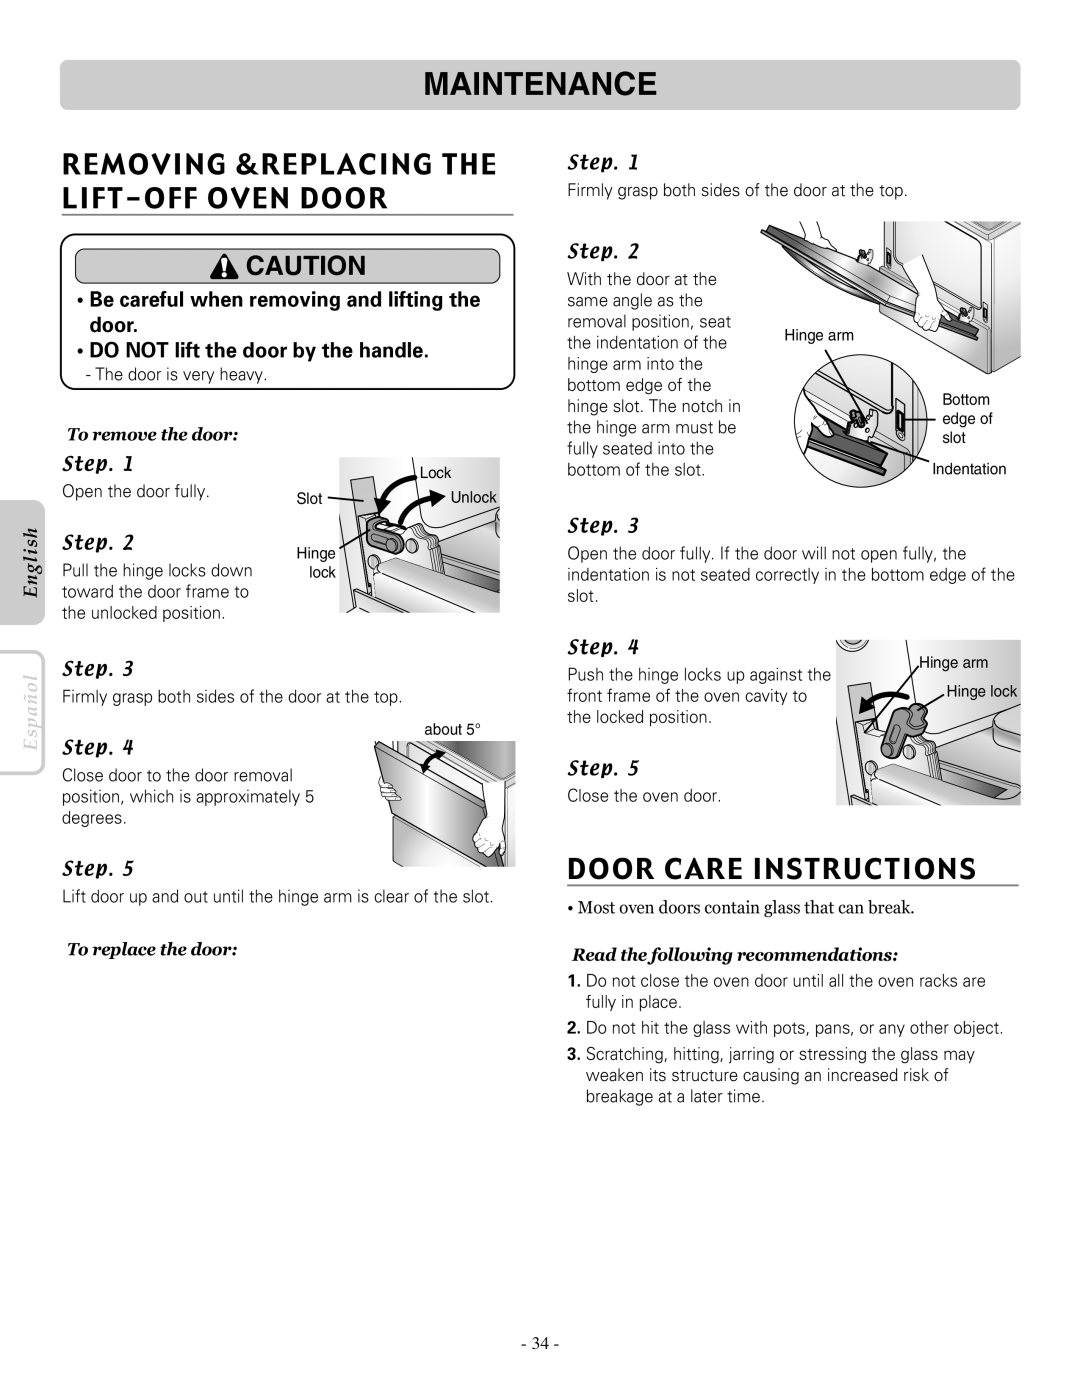 LG Electronics LRE30757ST Removing &Replacing The Lift-Offoven Door, Door Care Instructions, To remove the door, English 